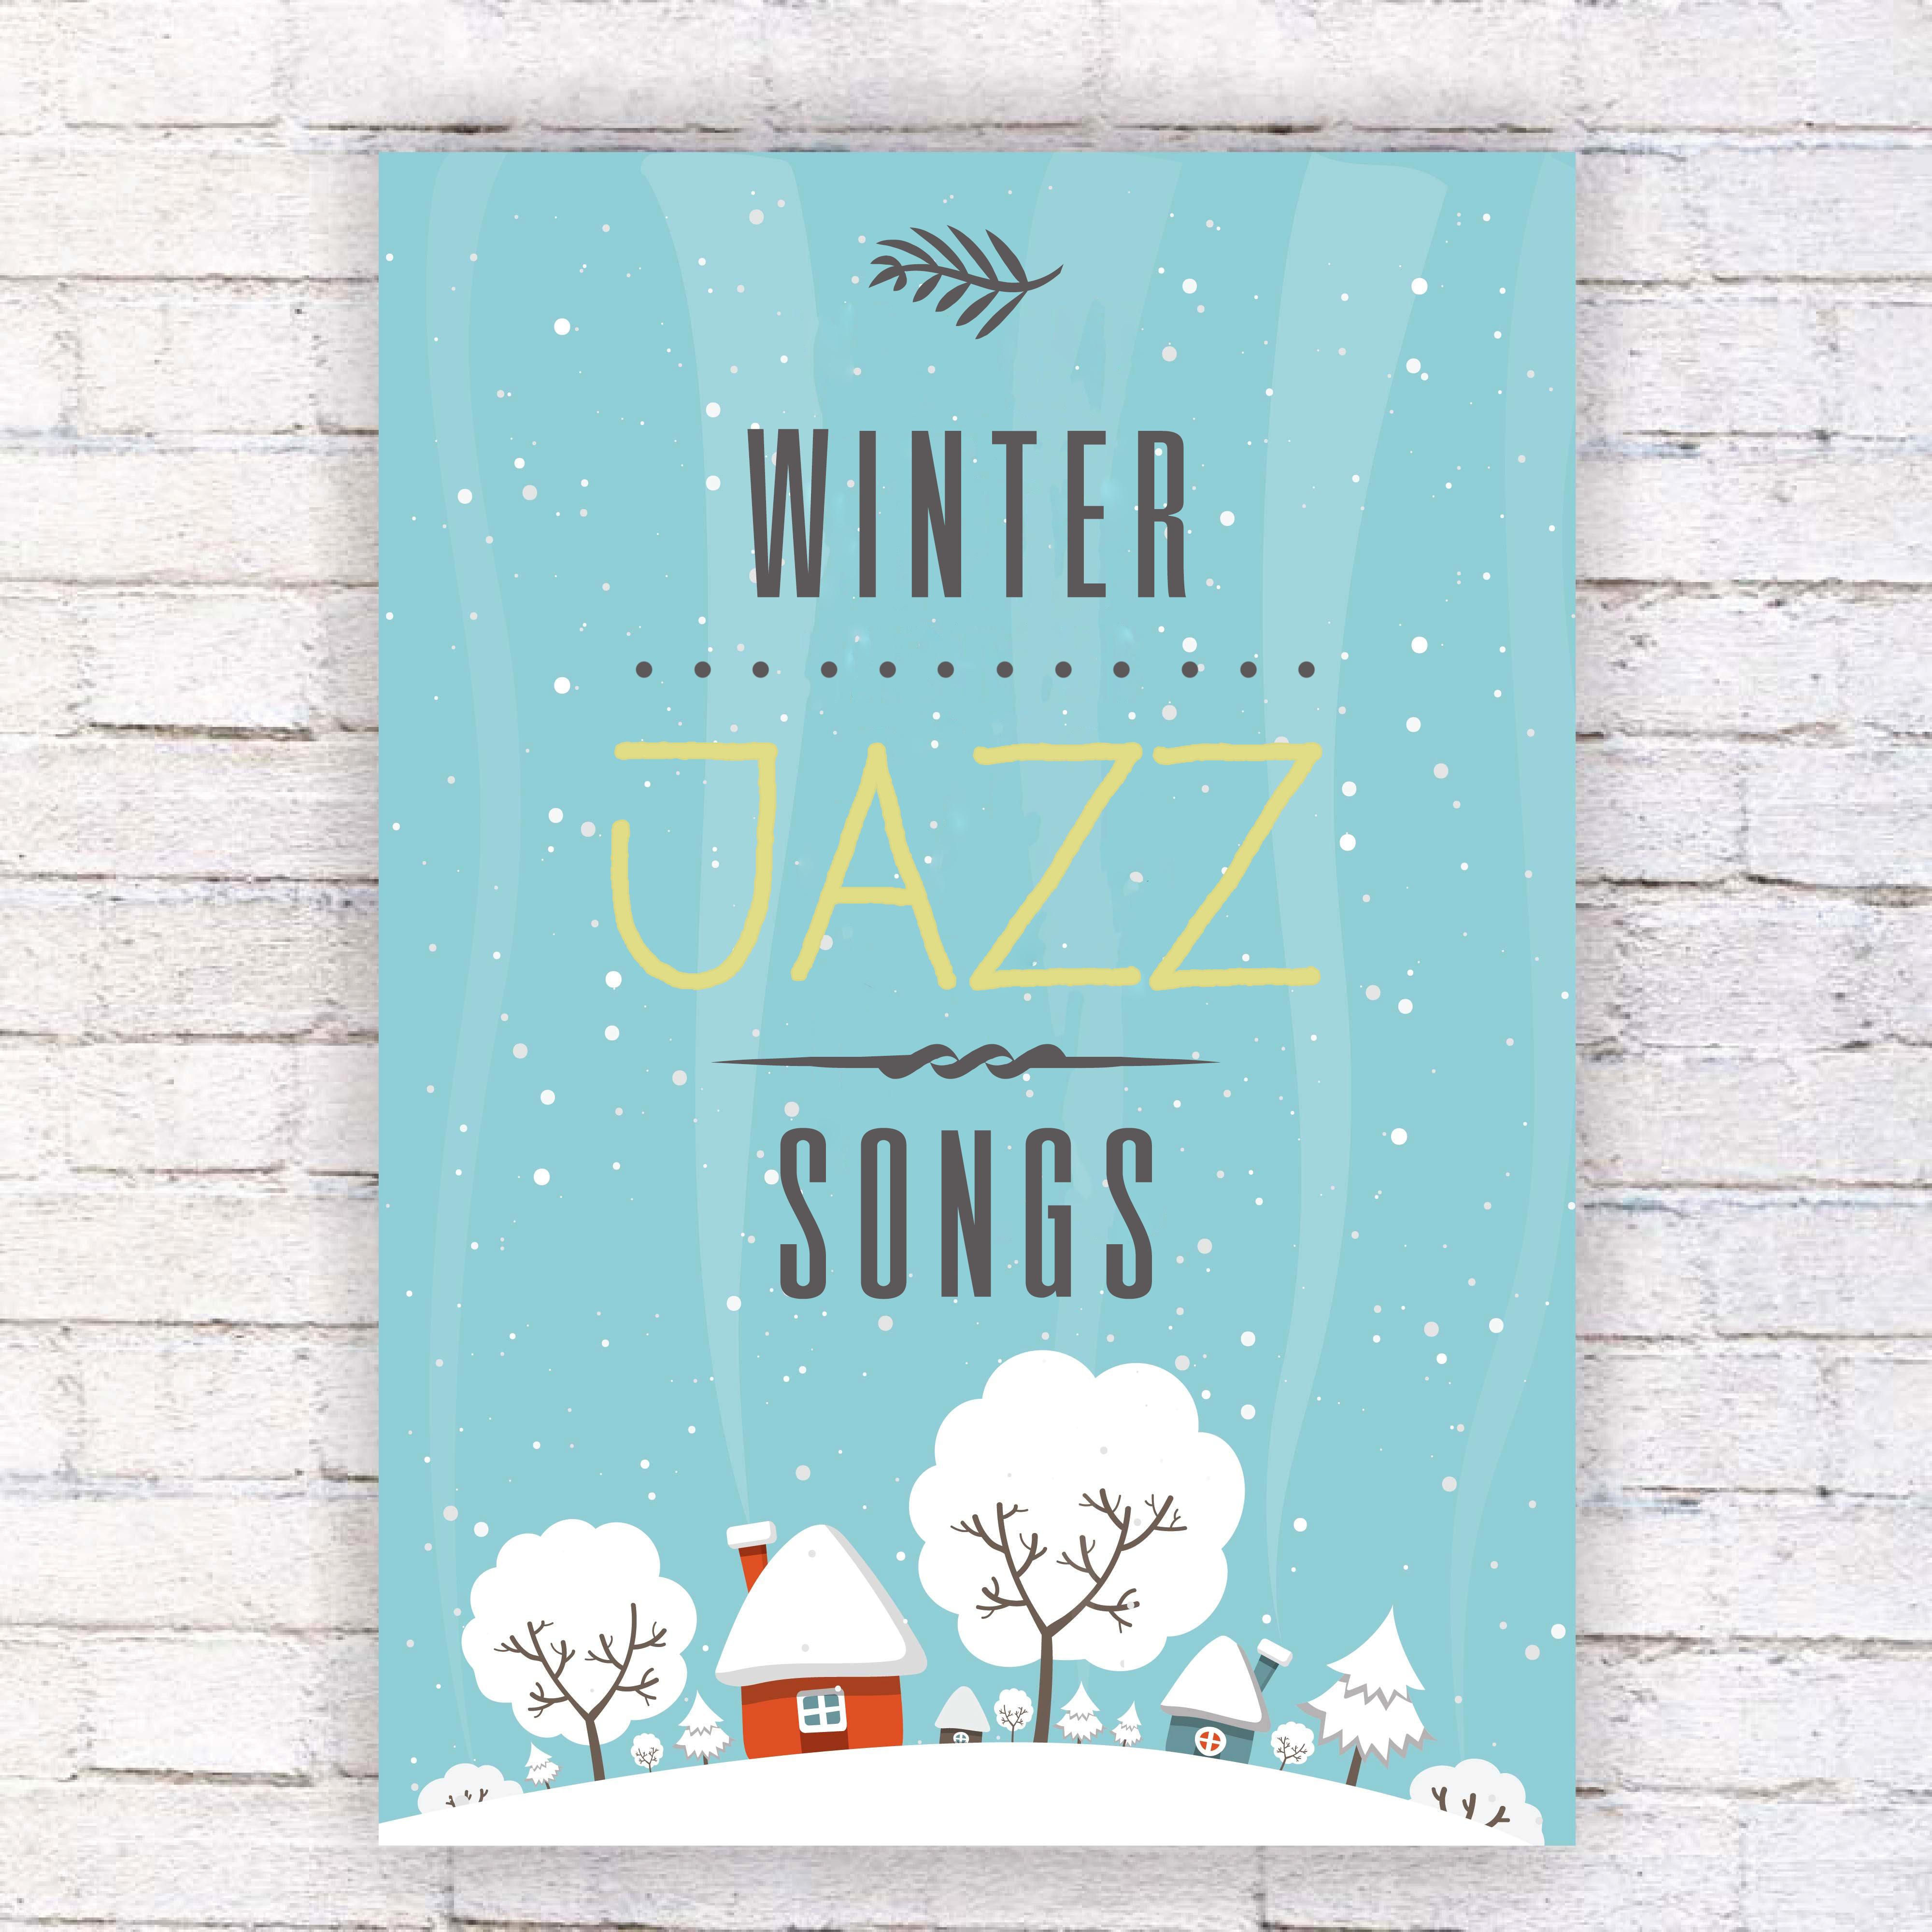 Winter Jazz Songs  Delicate Sounds of Jazz, Instrumental Music, Soft Sounds of Piano, Jazz Lounge